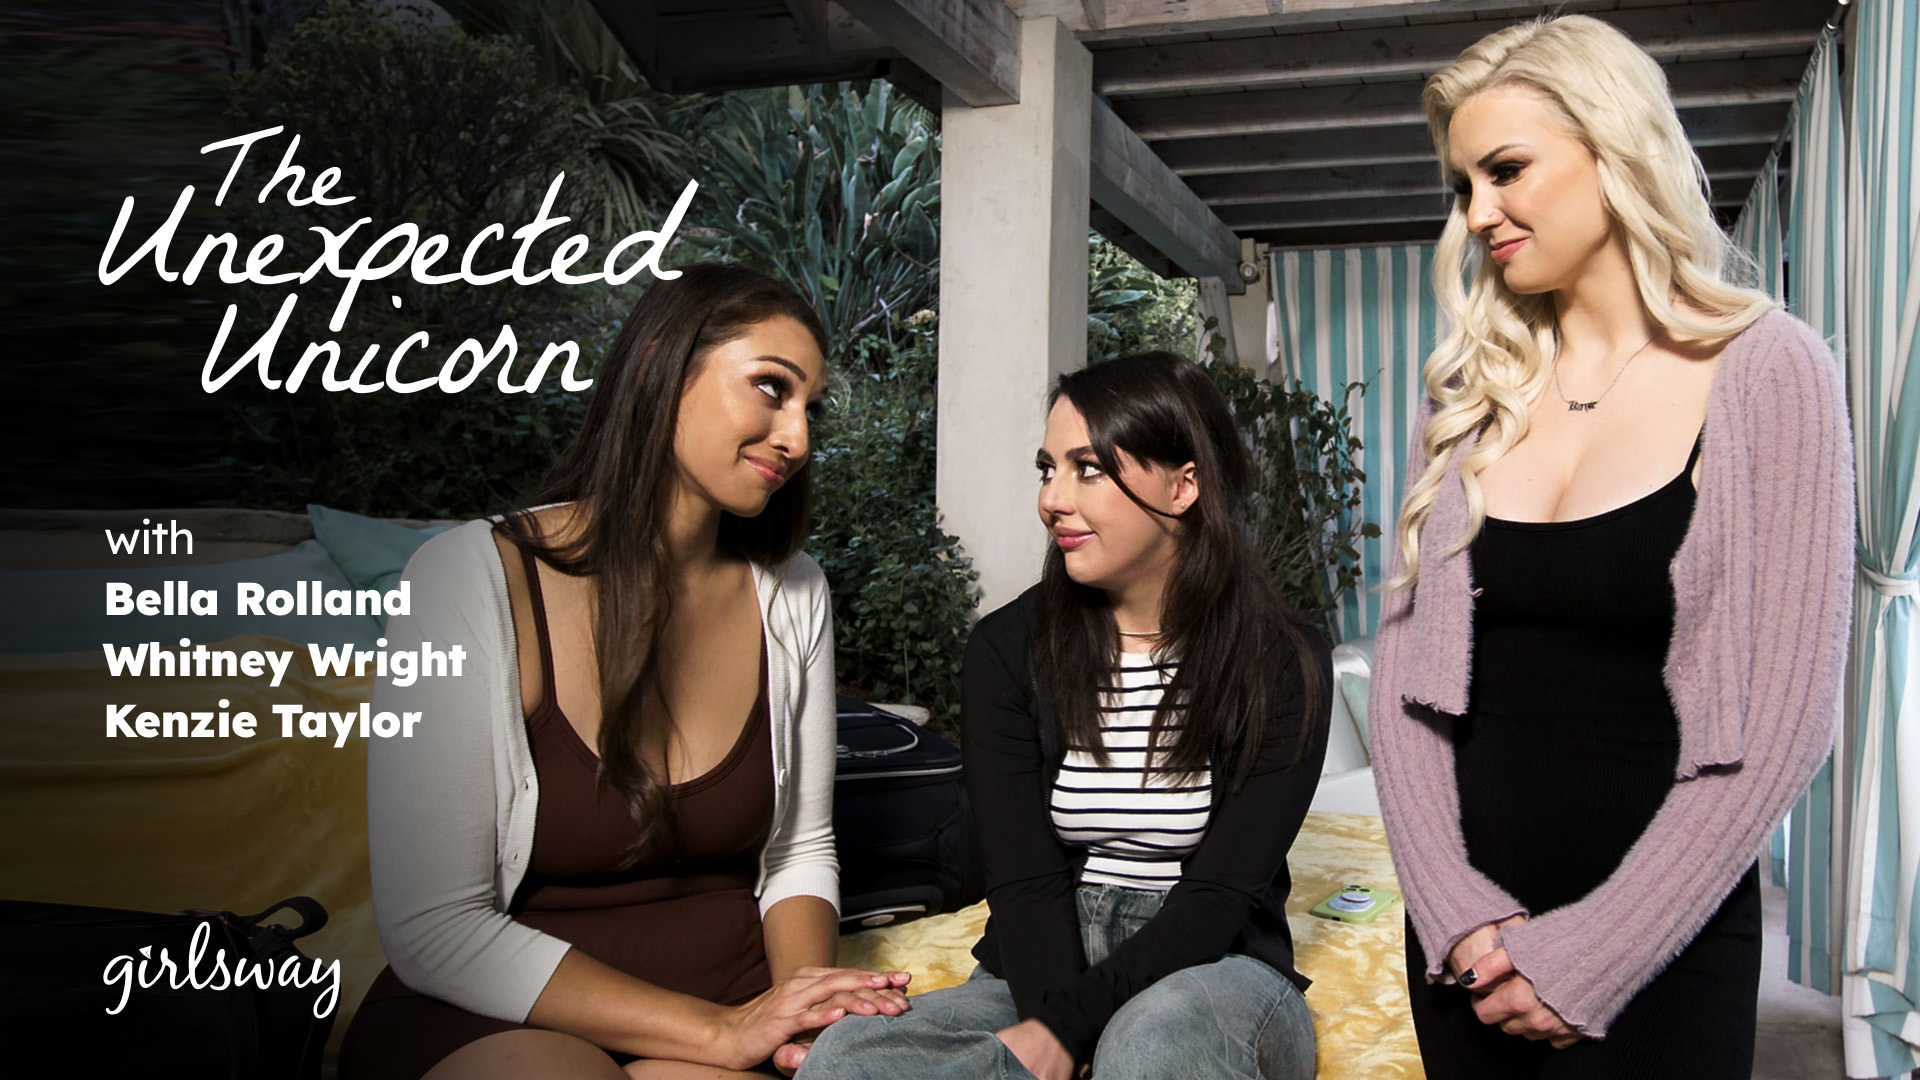 Girls Way Kenzie Taylor, Whitney Wright, Bella Rolland The Unexpected Unicorn